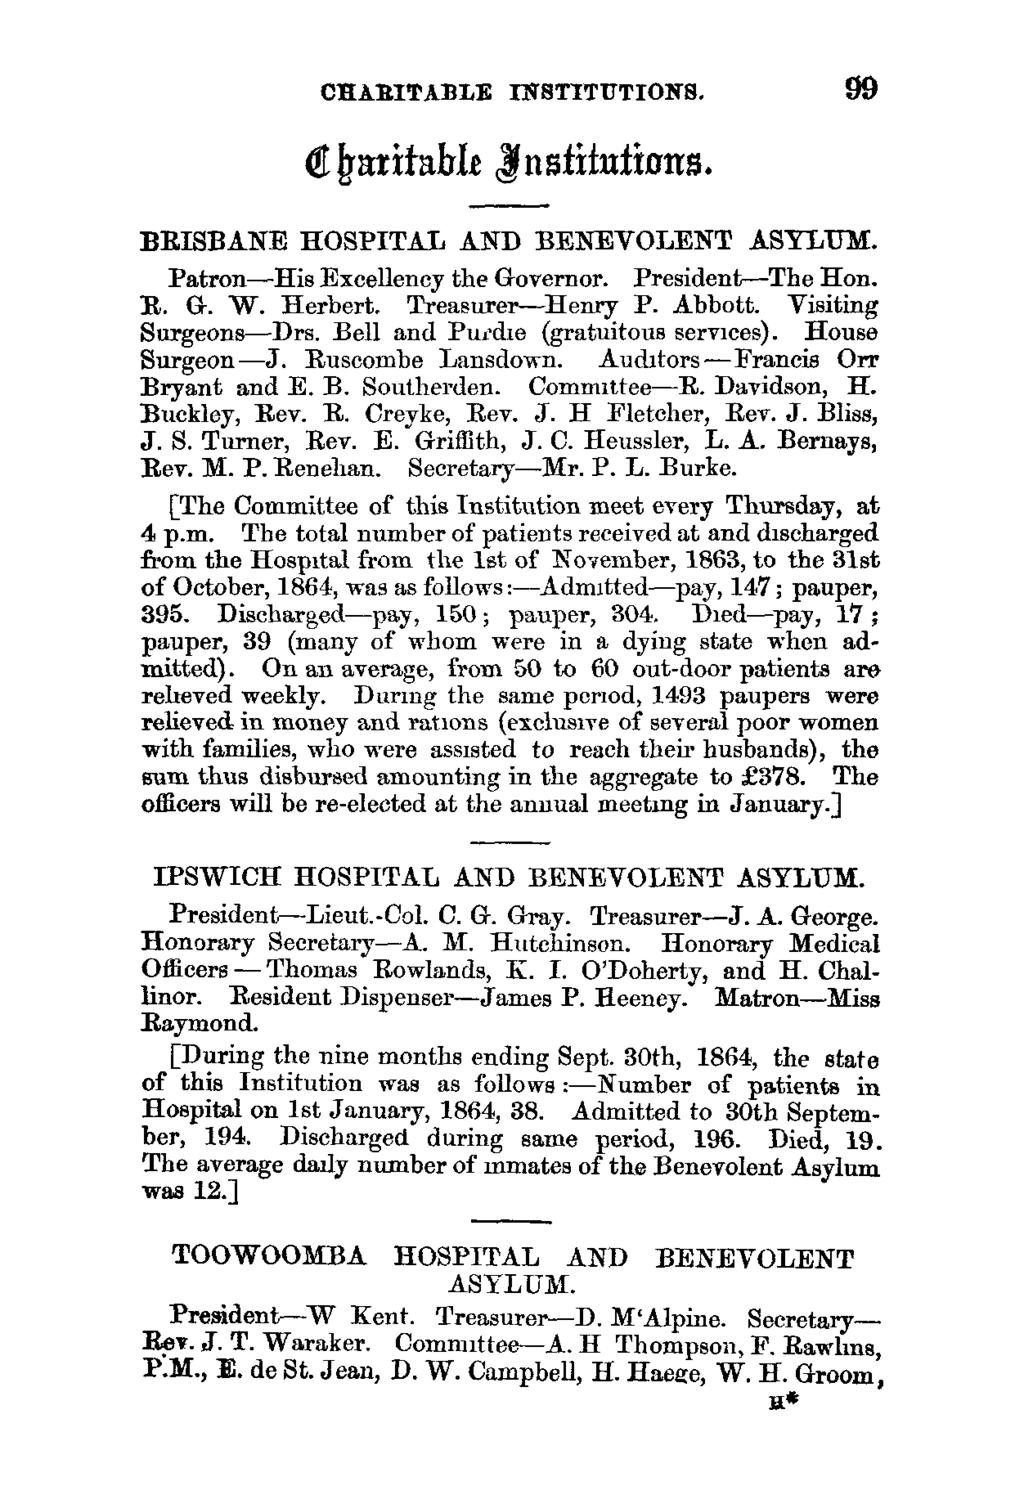 CHARITABLE INSTITUTIONS. 99 oquitiblf gnat futions. BRISBANE HOSPITAL AND BENEVOLENT ASYLUM. Patron-His Excellency the Governor. President-The Hon. R. G. W. Herbert. Treasurer-Henry P. Abbott.